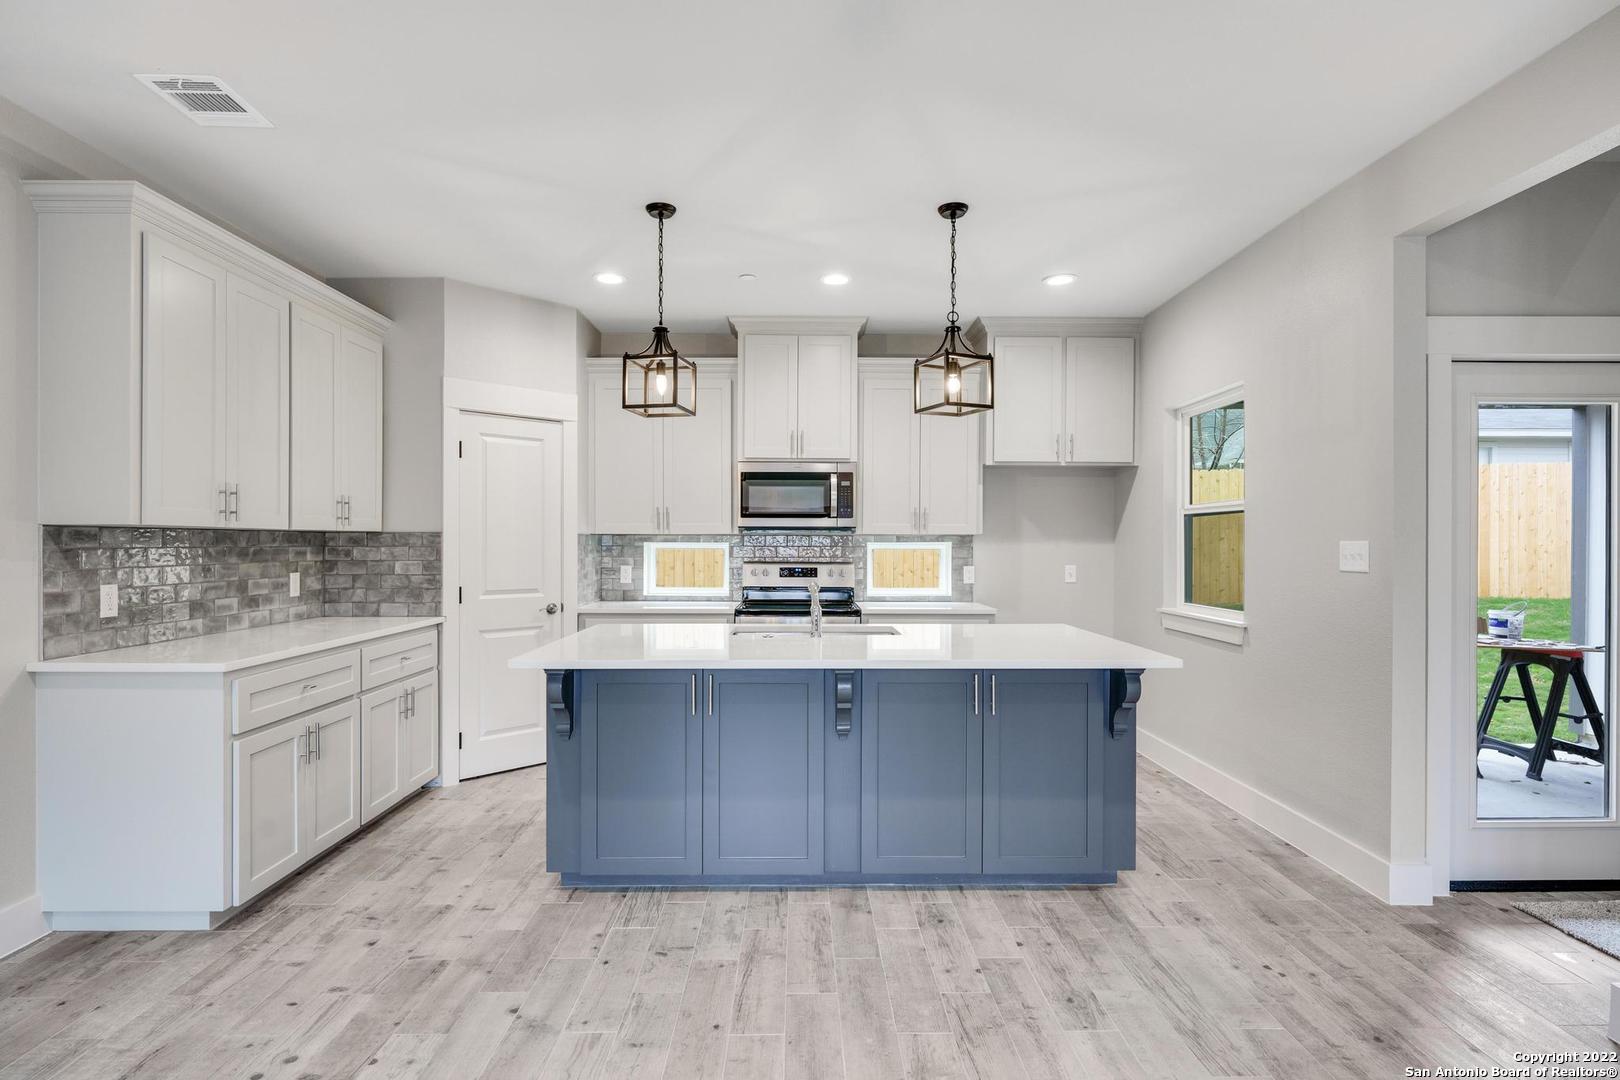 a large kitchen with stainless steel appliances kitchen island granite countertop a sink dishwasher a stove and a refrigerator with wooden floor